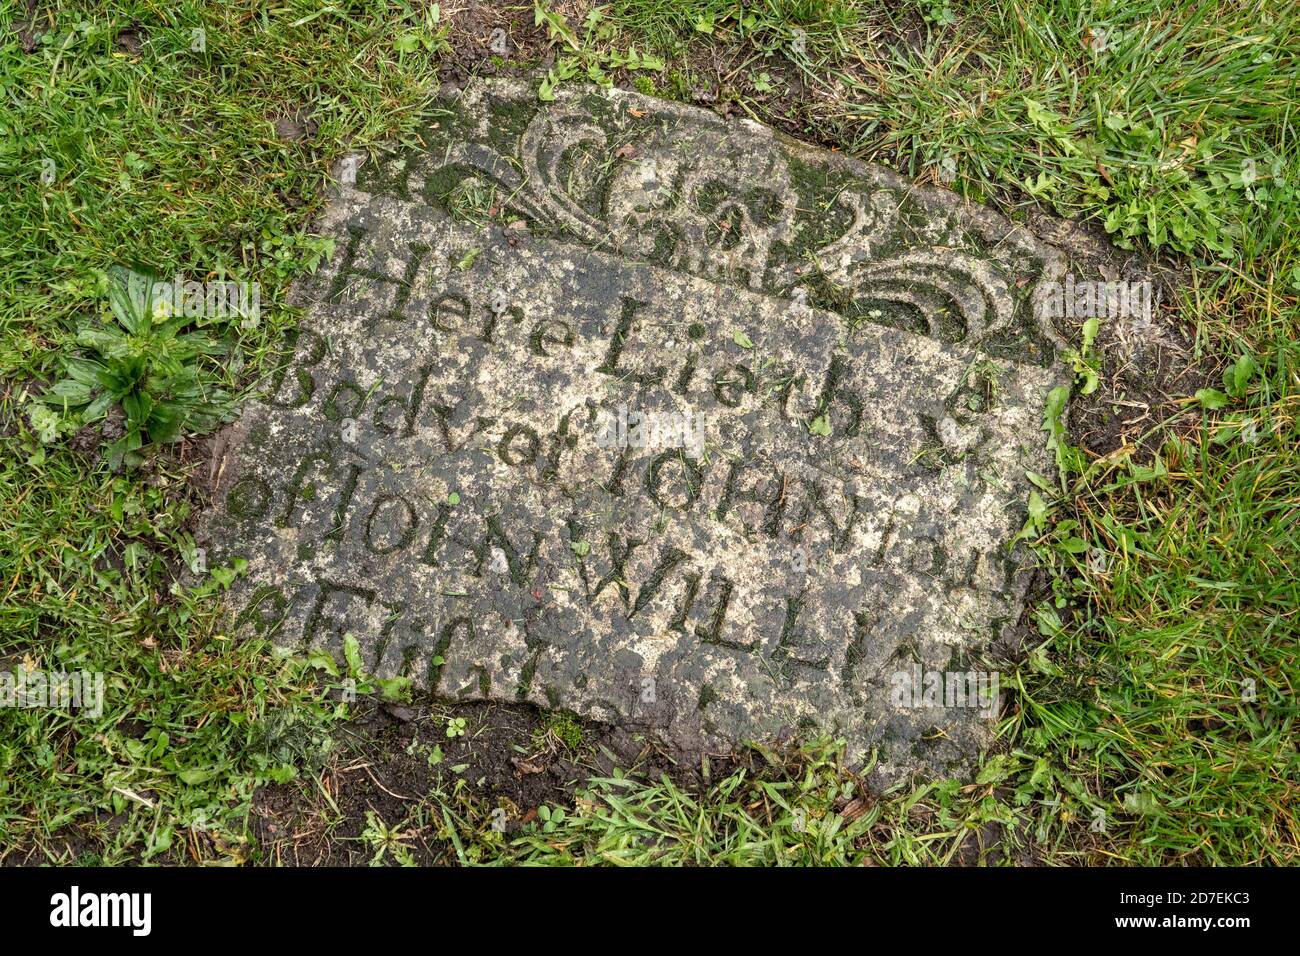 Section of graveyard headstone partly buried and overgrown by grass with skull motif visible Stock Photo